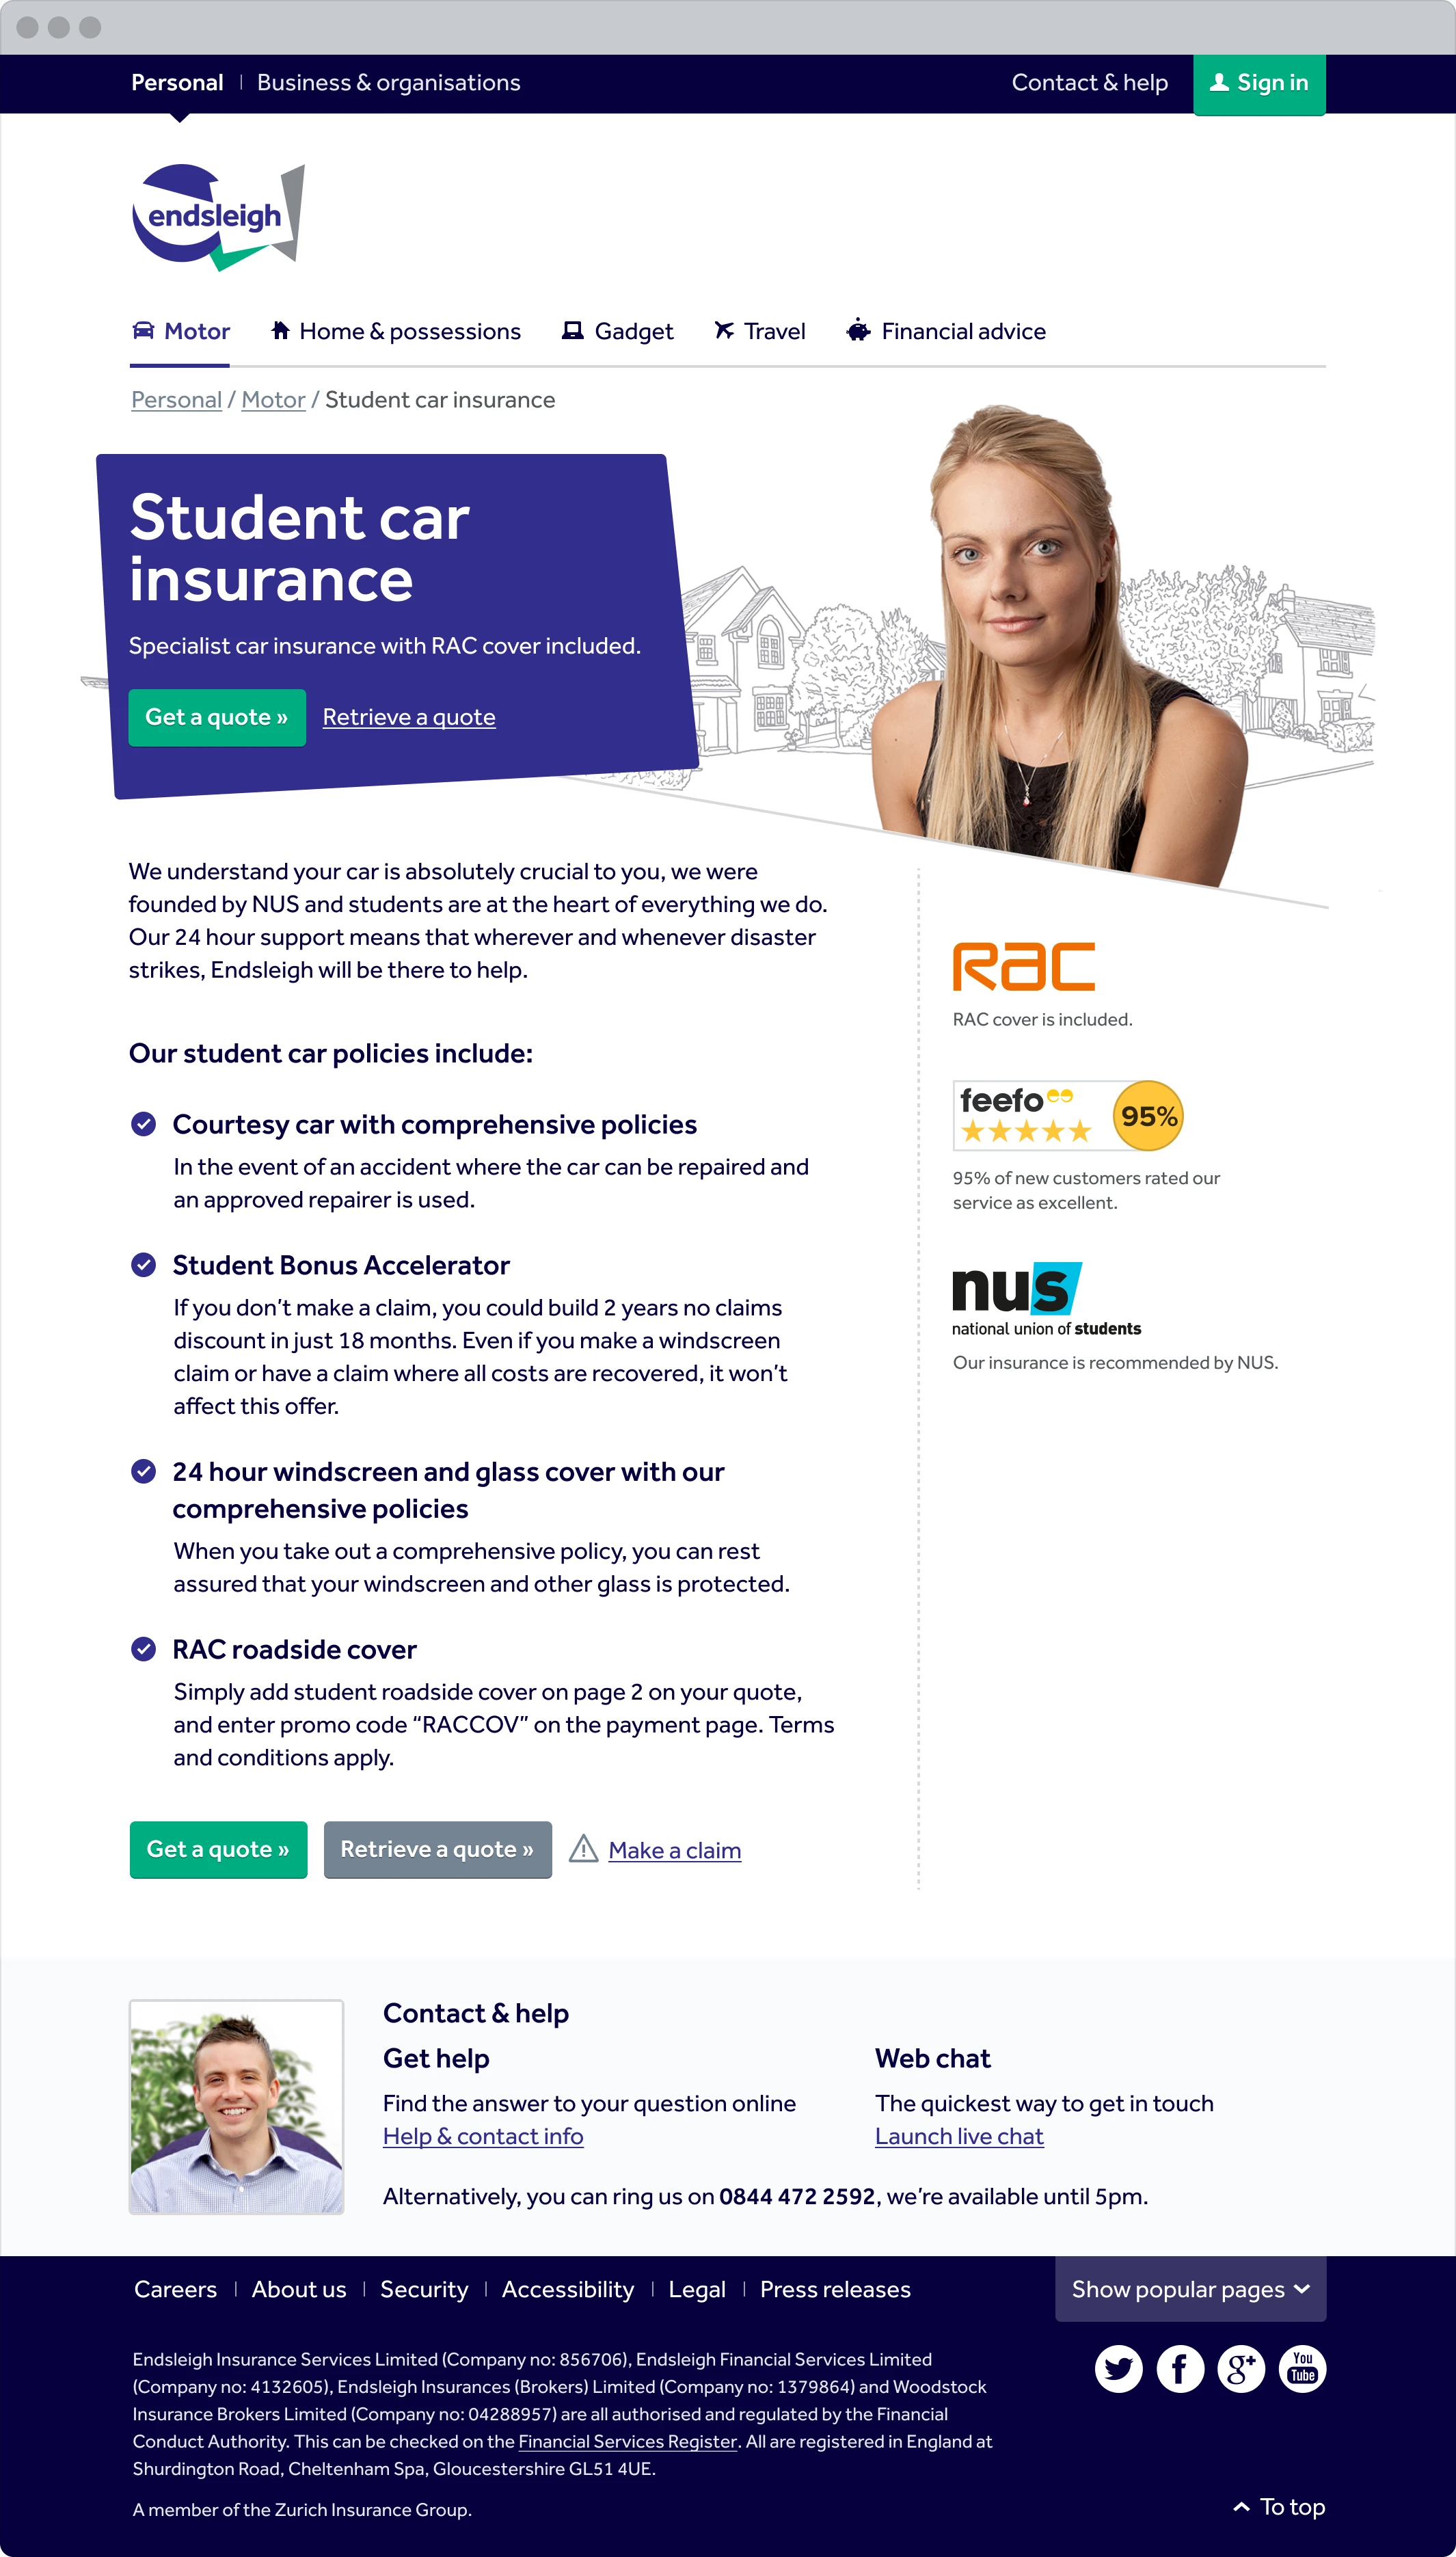 Screenshot of the Endsleigh student car insurance webpage